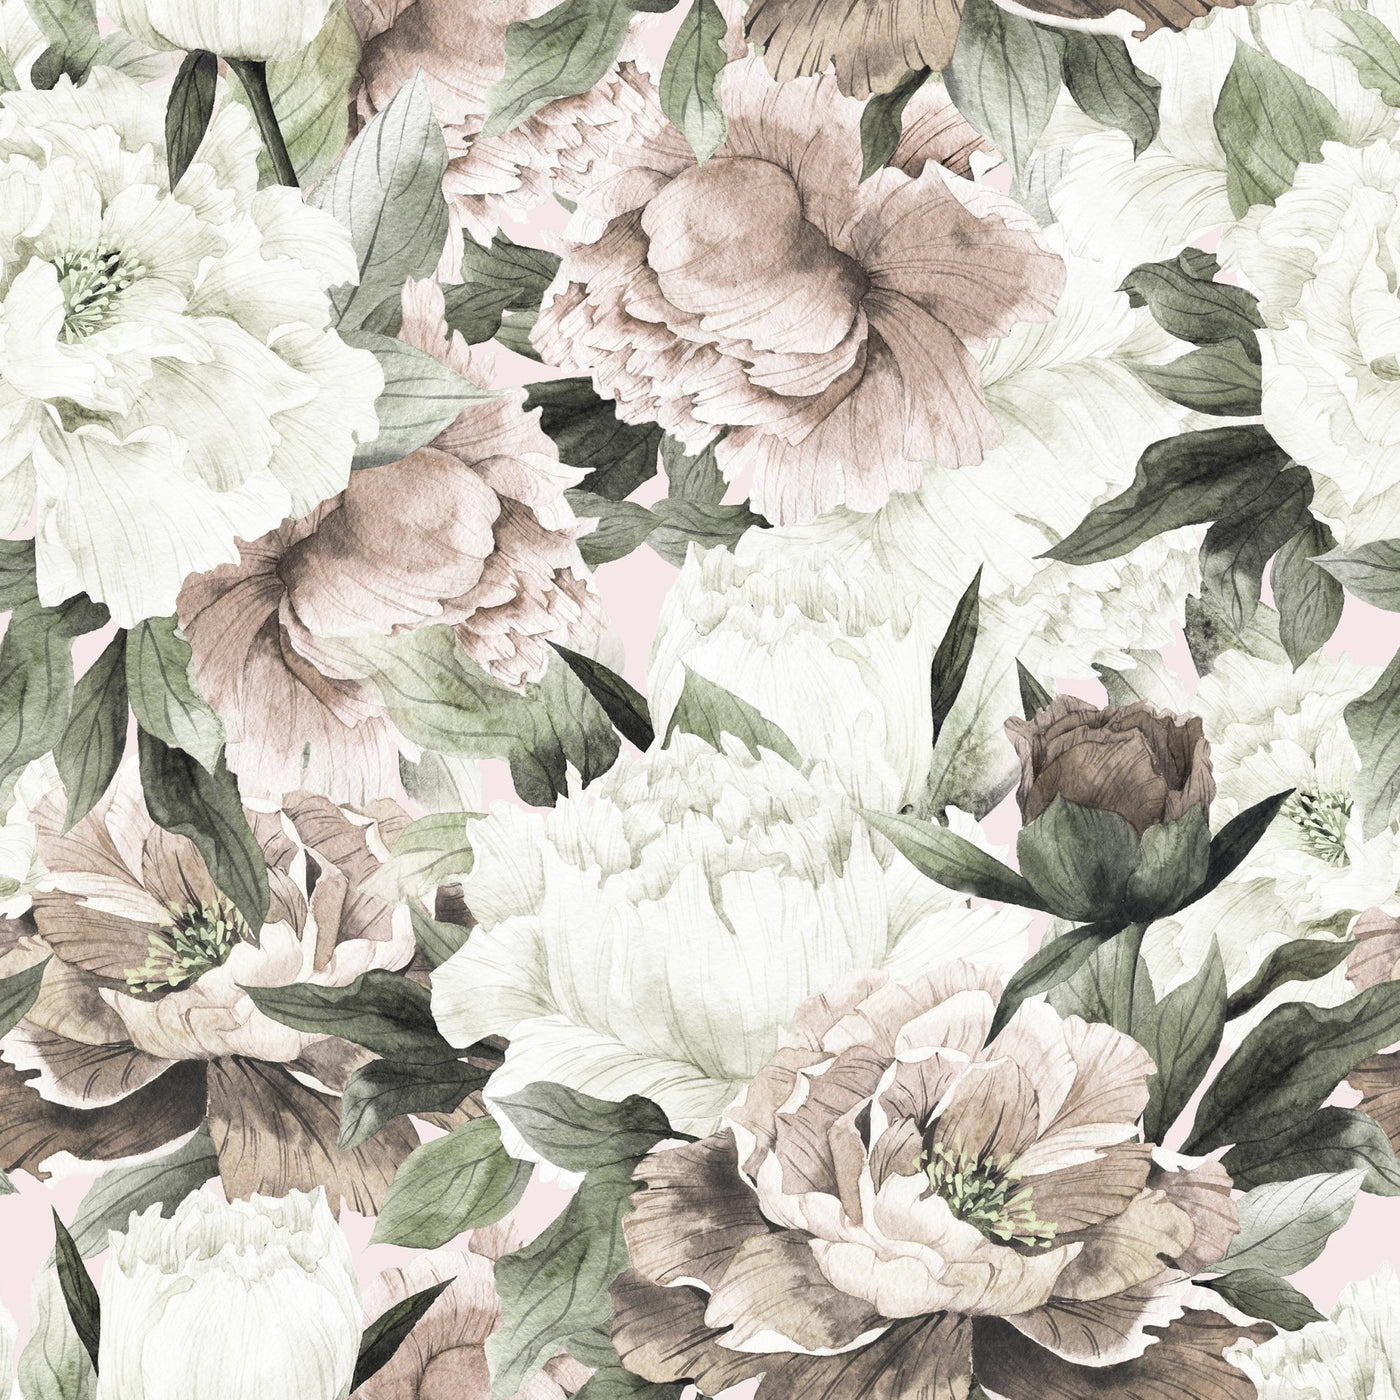 Watercolour Pink Roses Floral Wallpaper - Jack Harry and Ollie